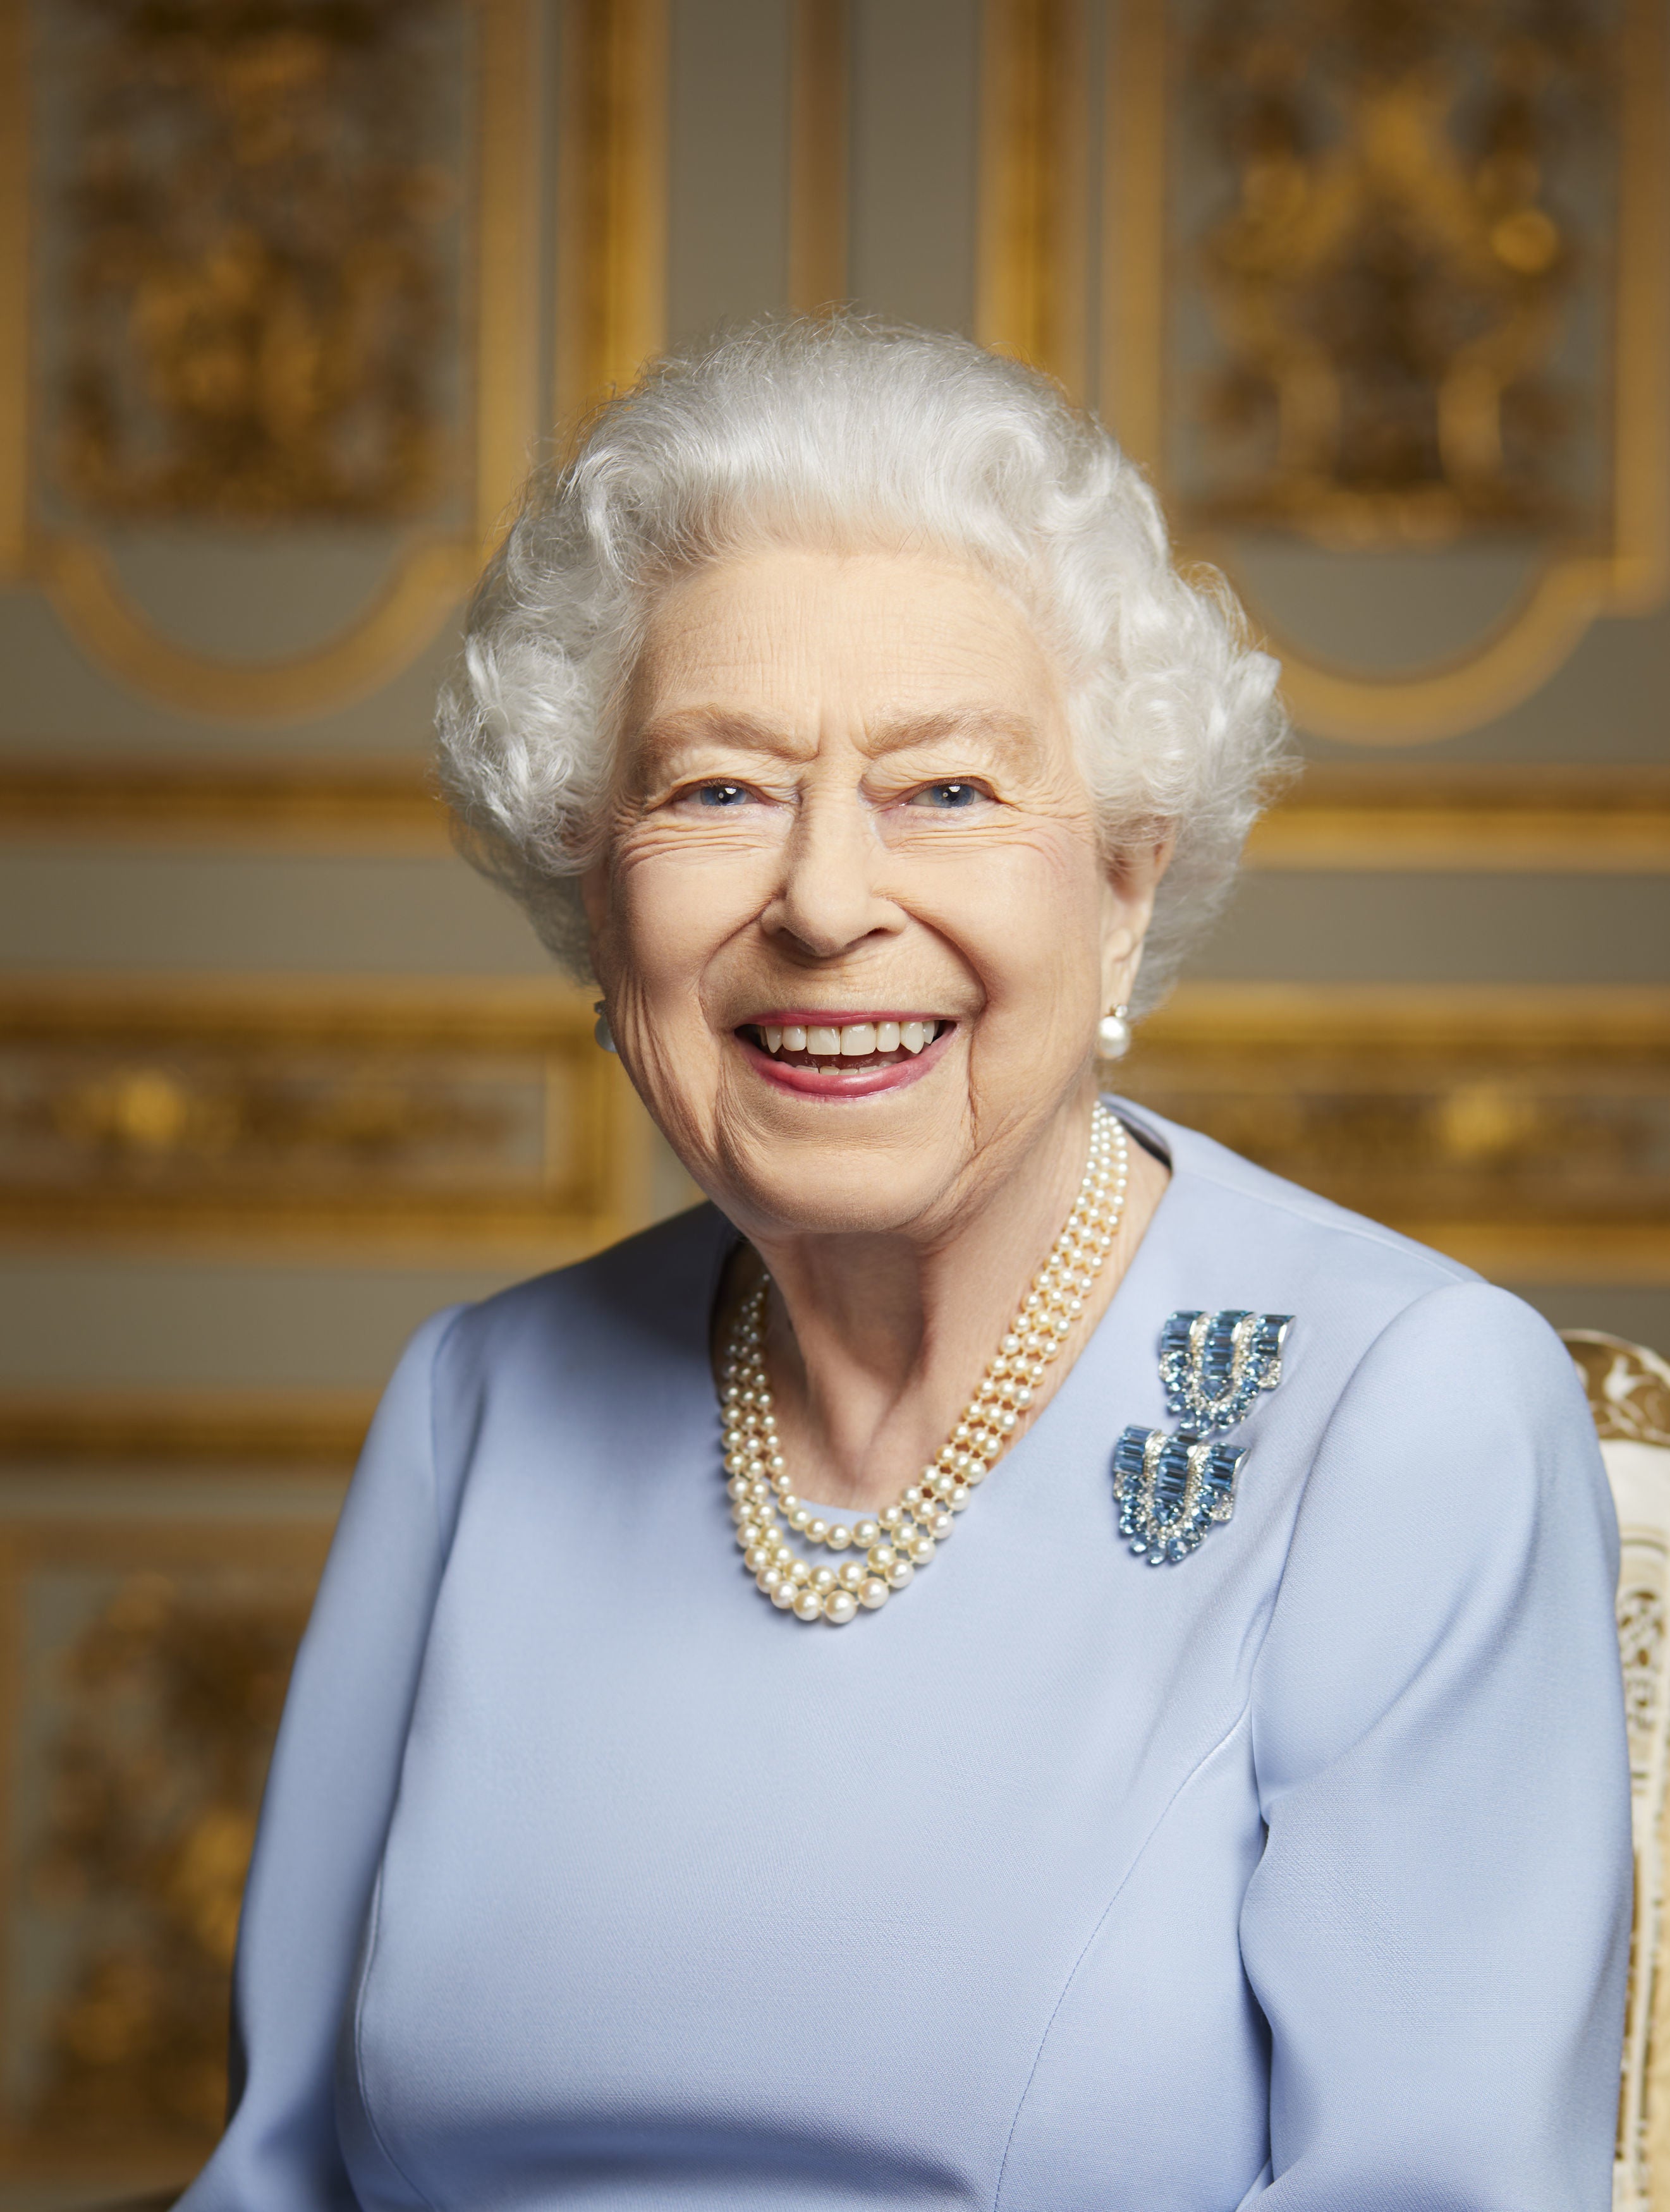 The Queen at Windsor Castle in May 2022 (Royal Household/Ranald Mackechnie/PA)